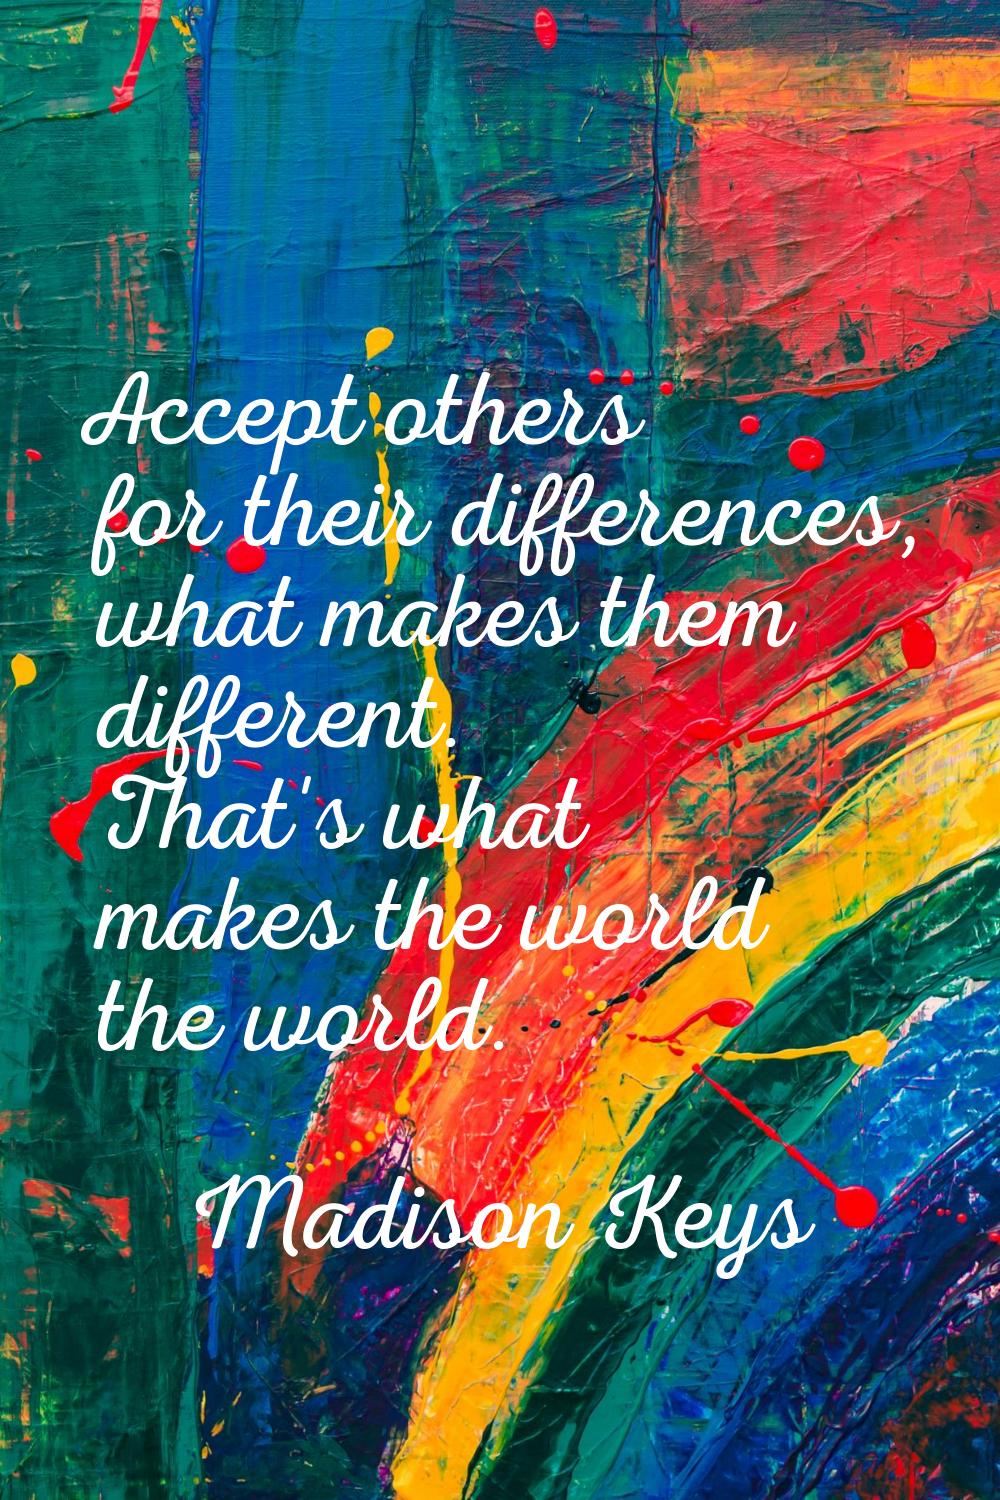 Accept others for their differences, what makes them different. That's what makes the world the wor